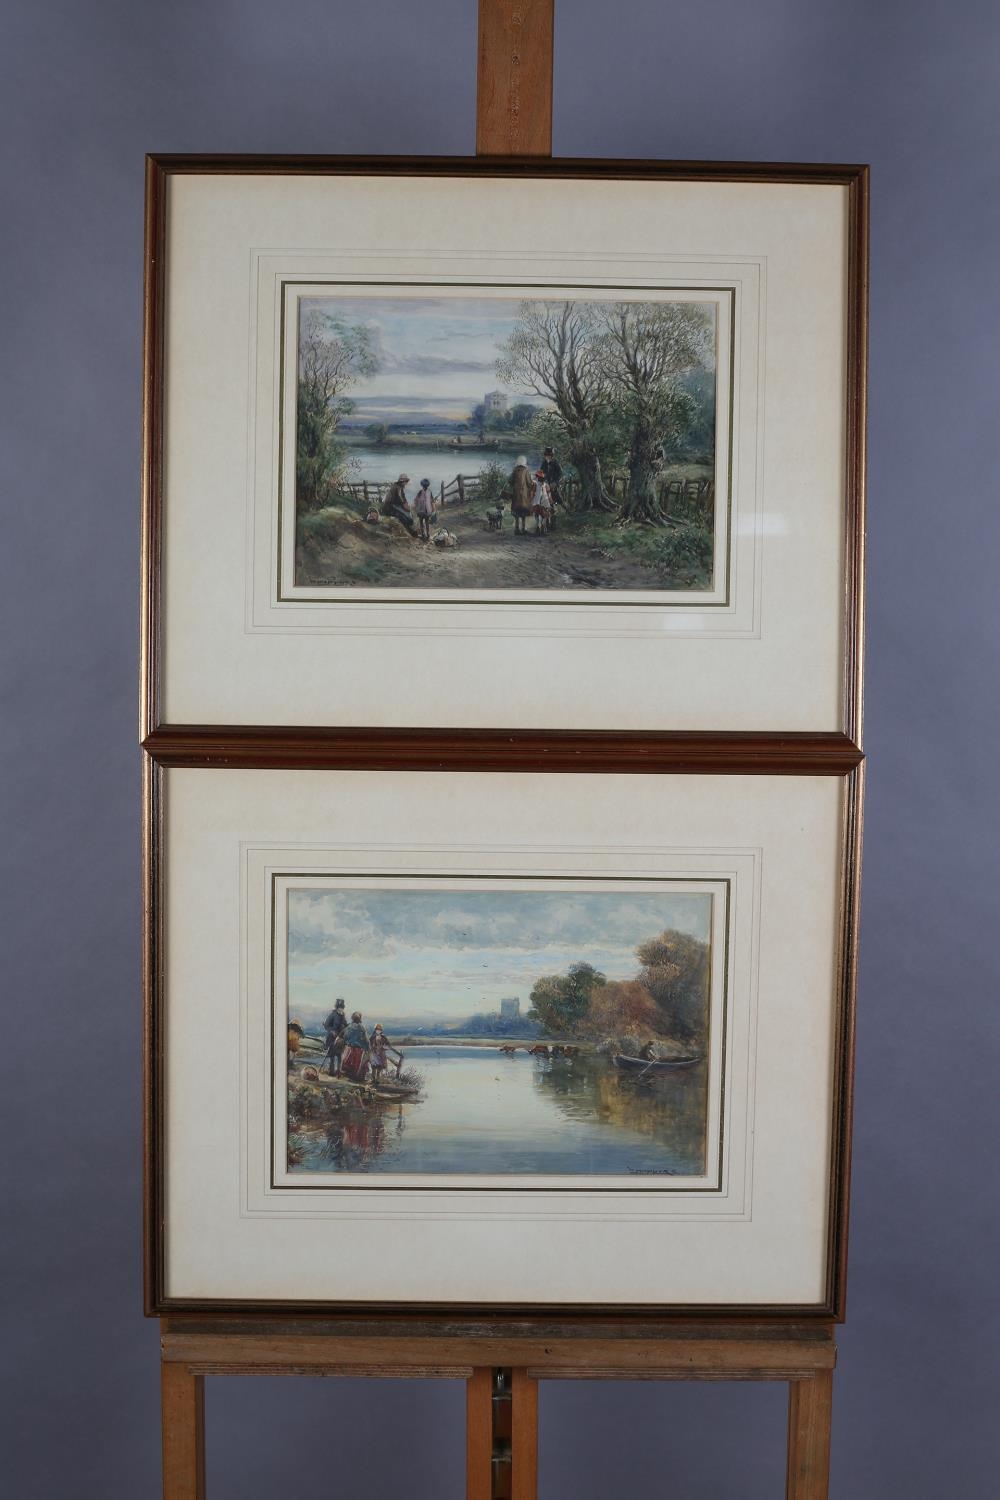 WILLIAM MANNERS R.B.A. (1860-1930), 'A Riverside View' and 'Waiting for the Ferry', watercolour,